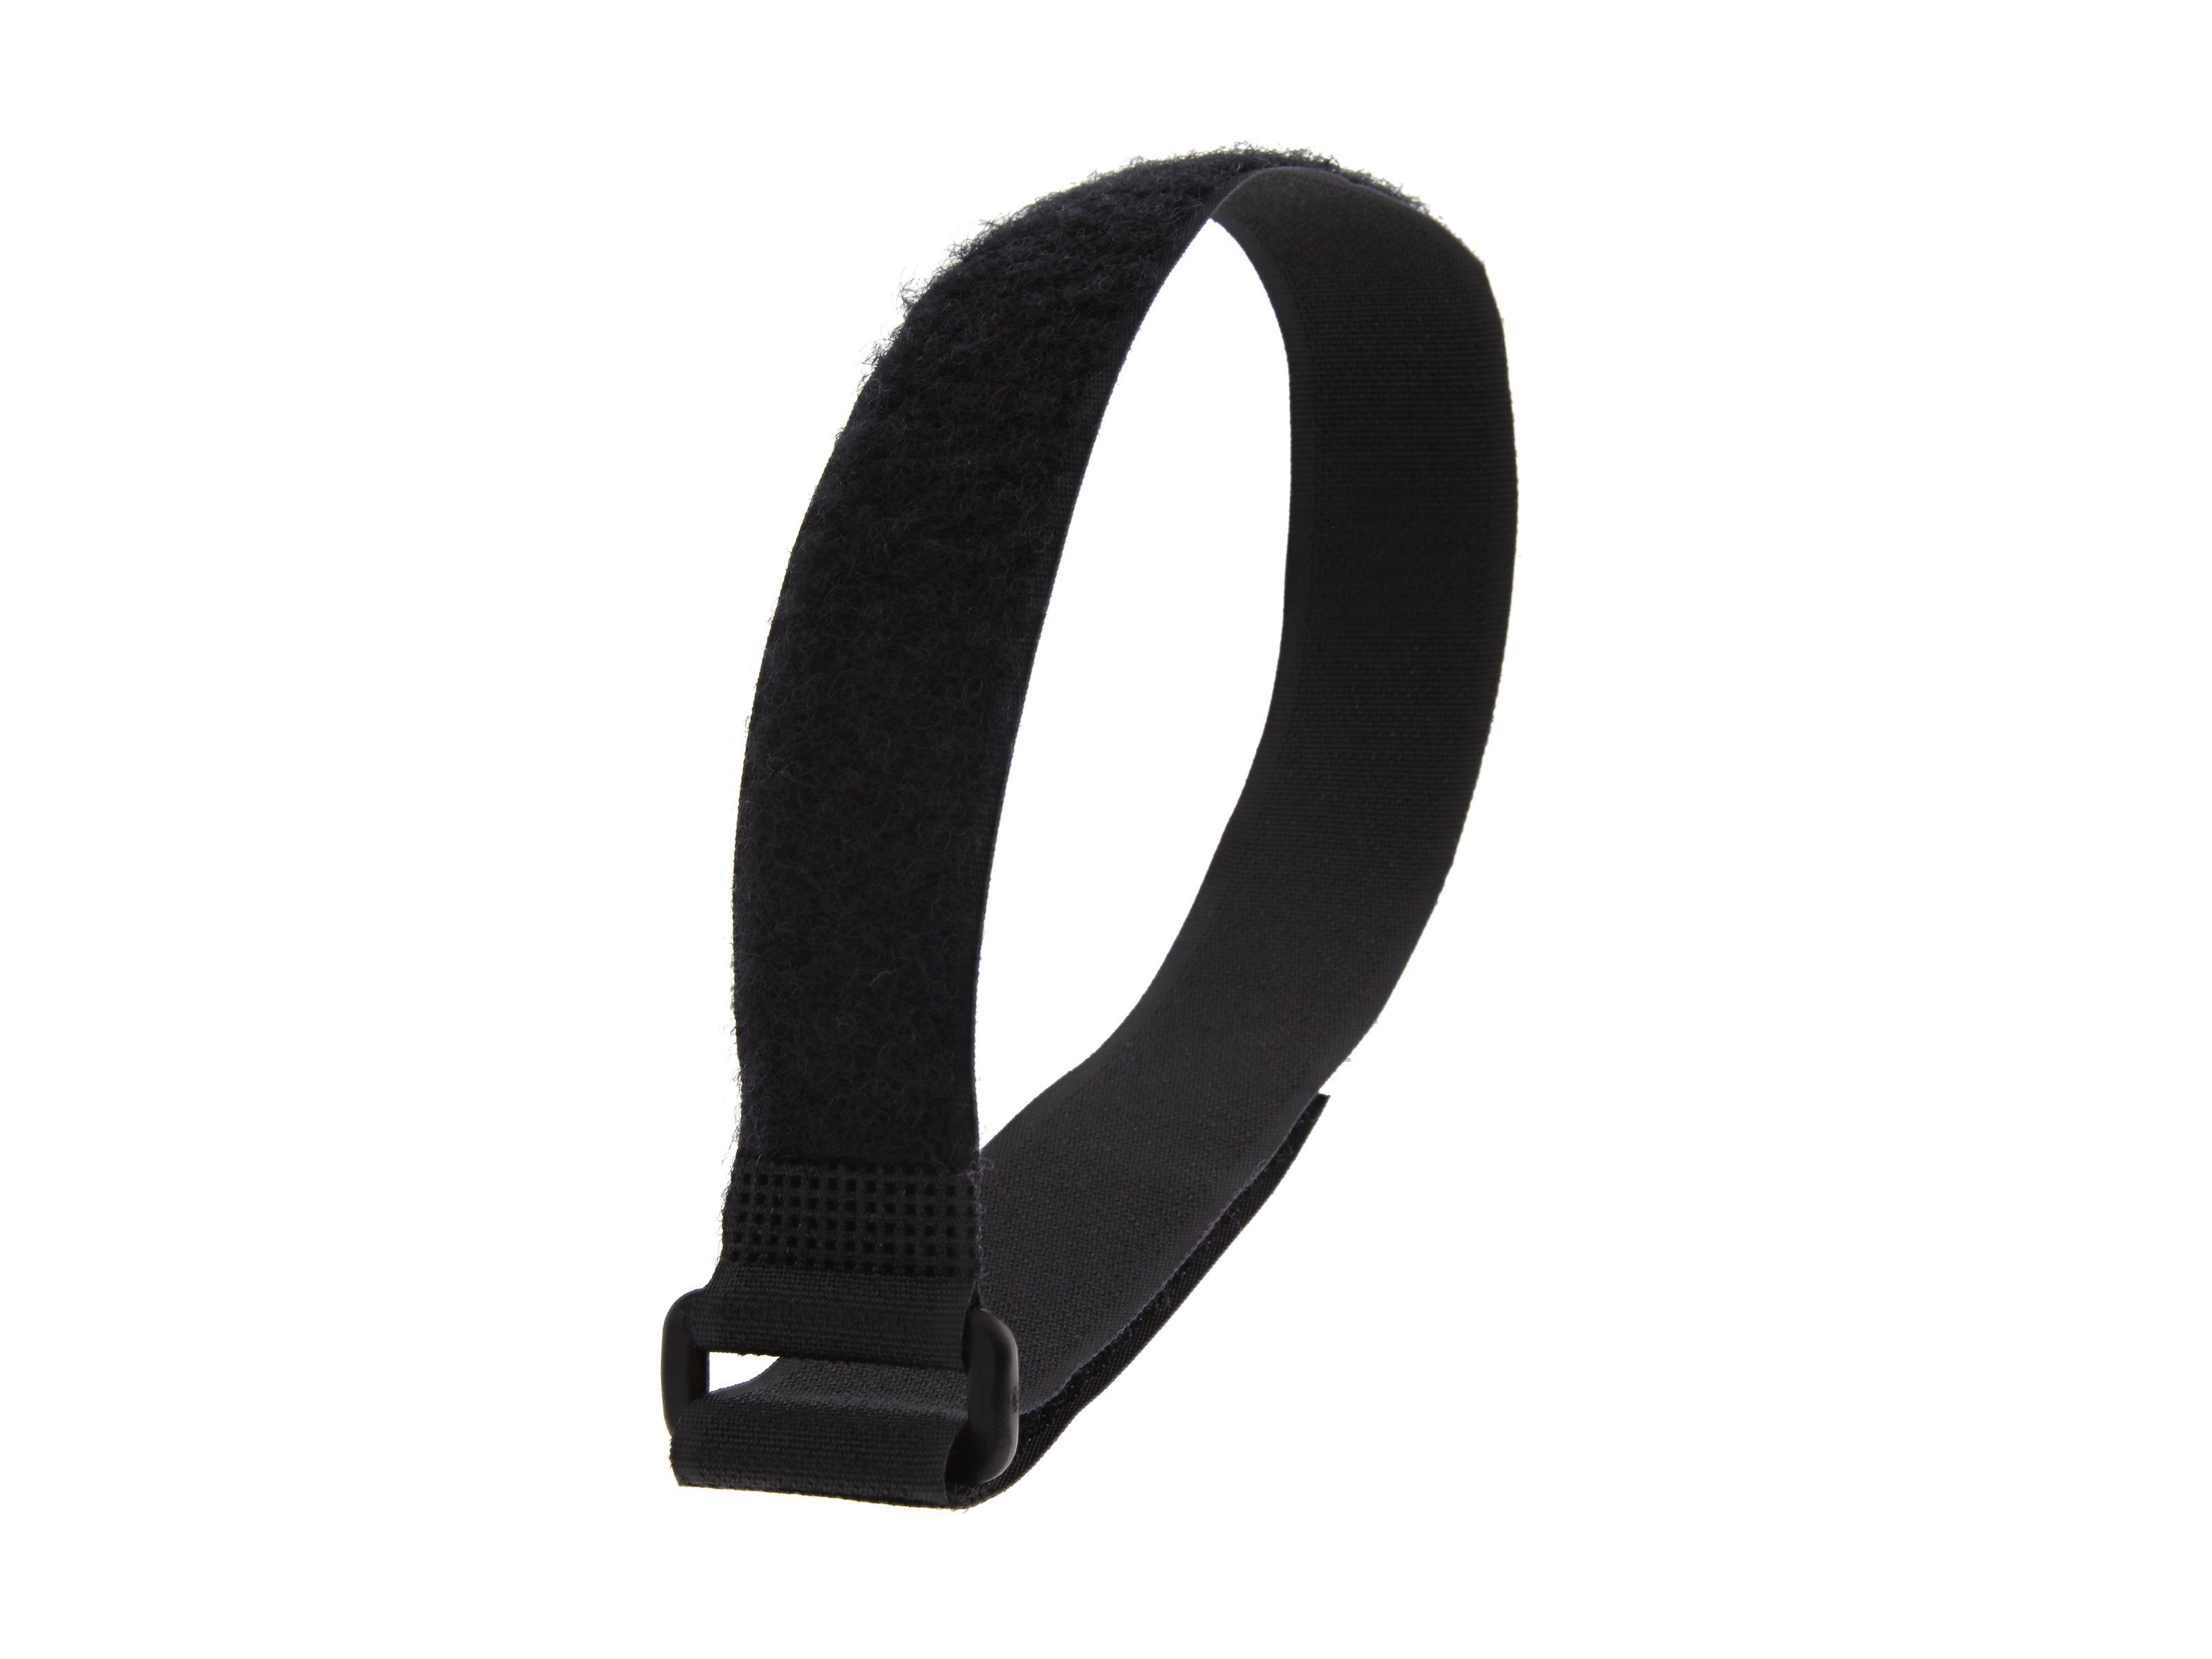 Cinch Straps, Reusable Black Nylon Cable/Securing Straps, 1 inch Wide